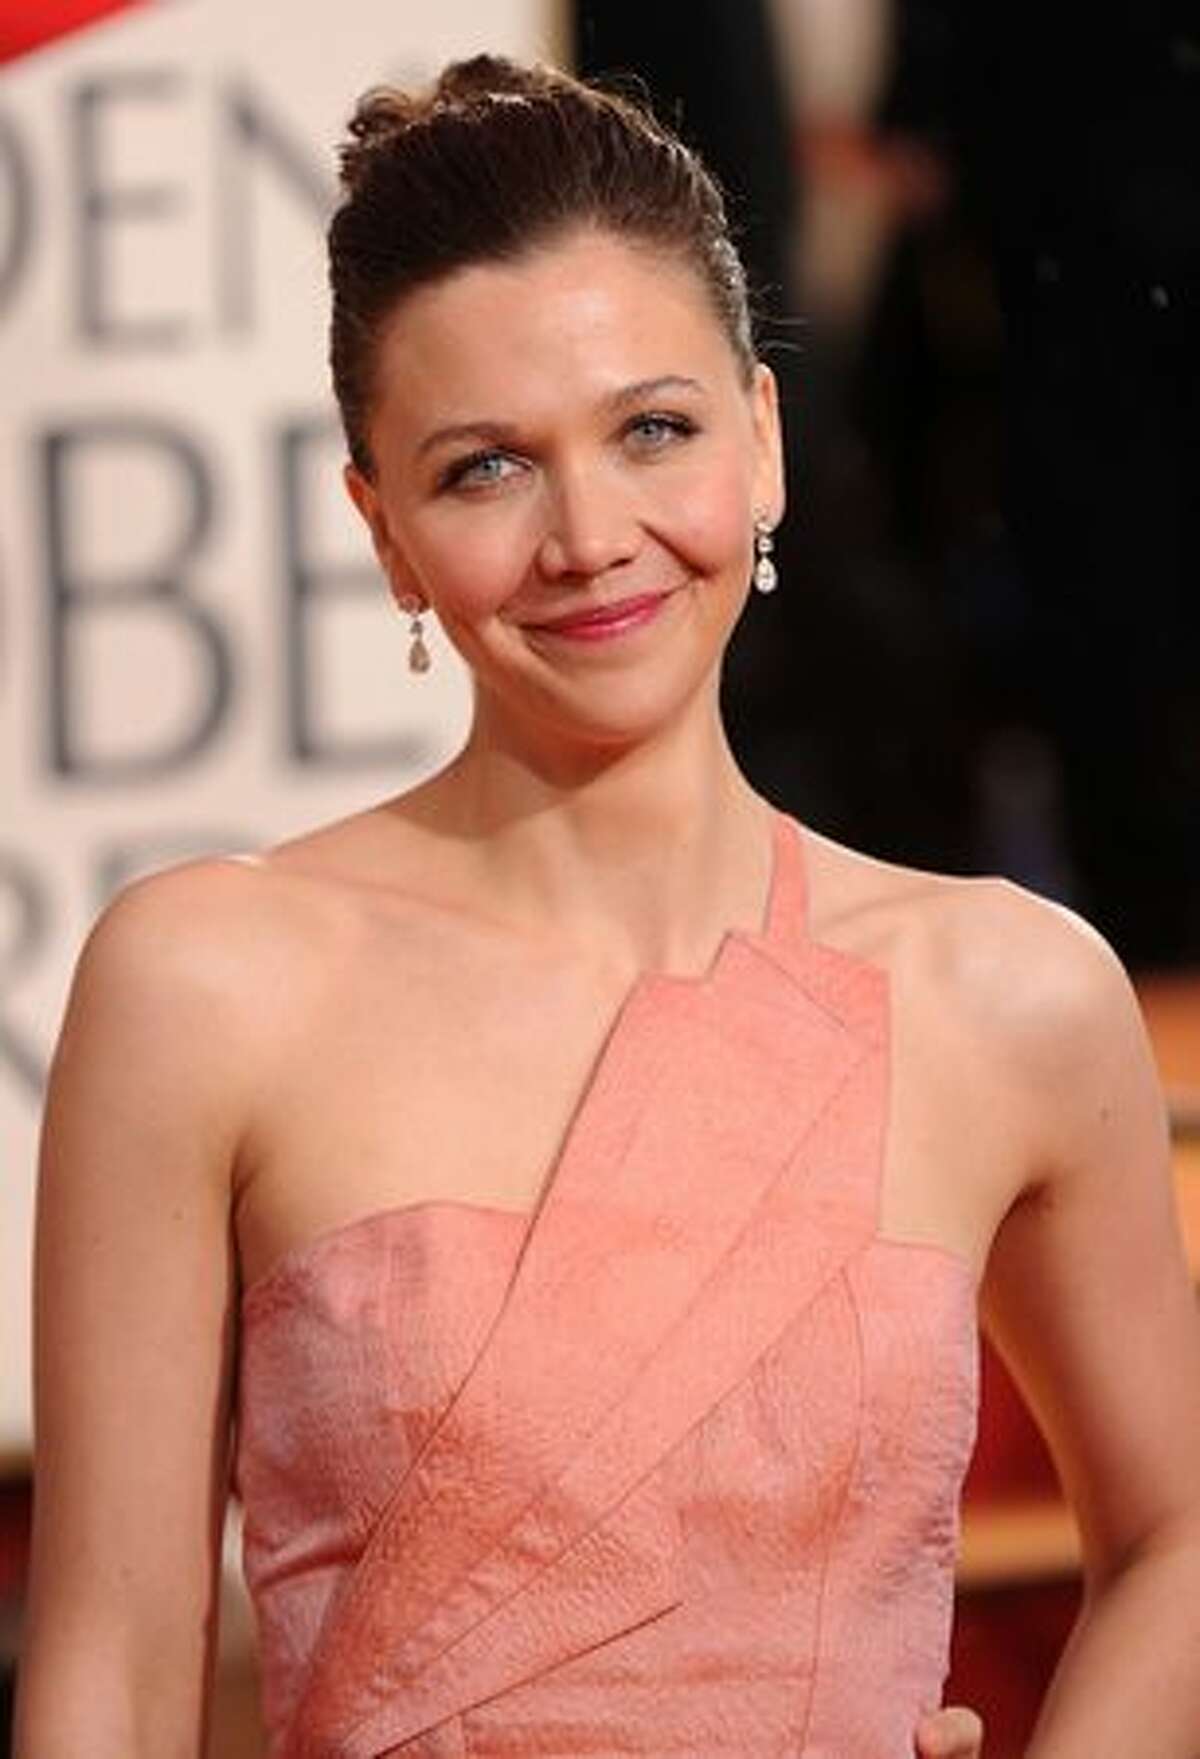 Actress Maggie Gyllenhaal arrives at the 67th Annual Golden Globe Awards held at The Beverly Hilton Hotel in Beverly Hills, California.